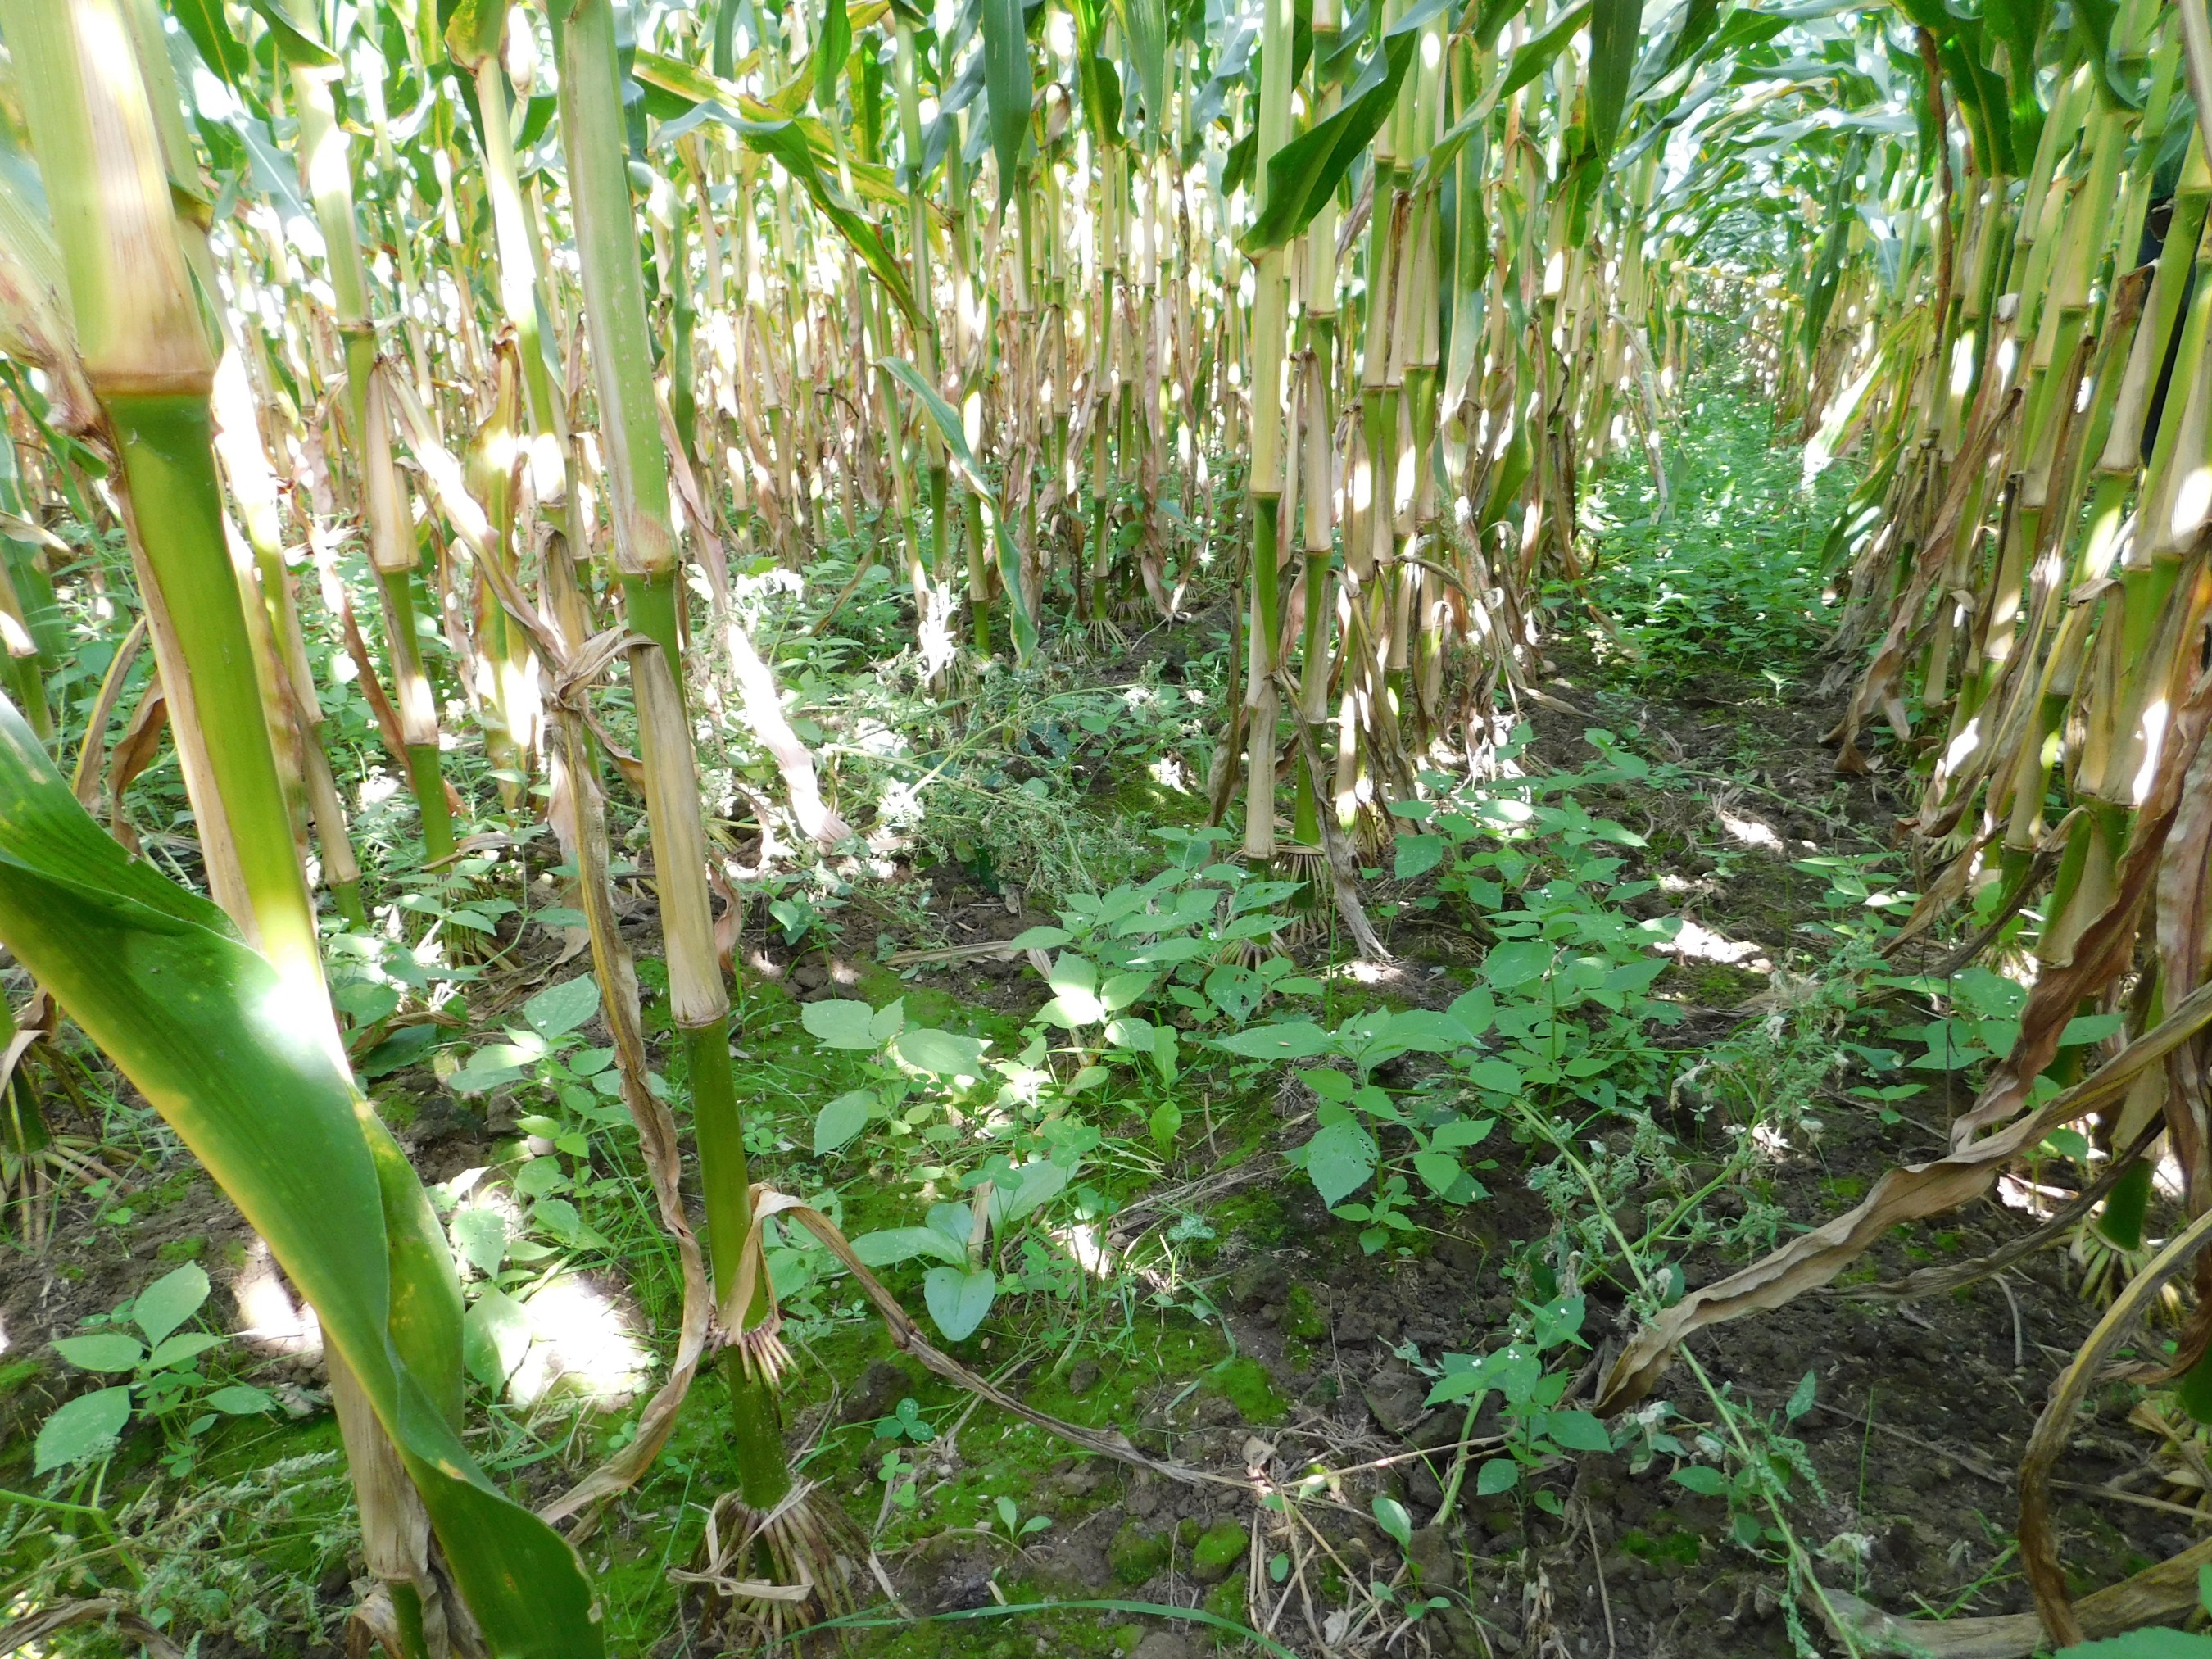 Ben & Jerry’s new pilot project will look at the effect of inter-seeded biodiverse cover cropping and growing slightly fewer stalks to allow more sunlight to reach the plants. Photo: Ben & Jerry’s